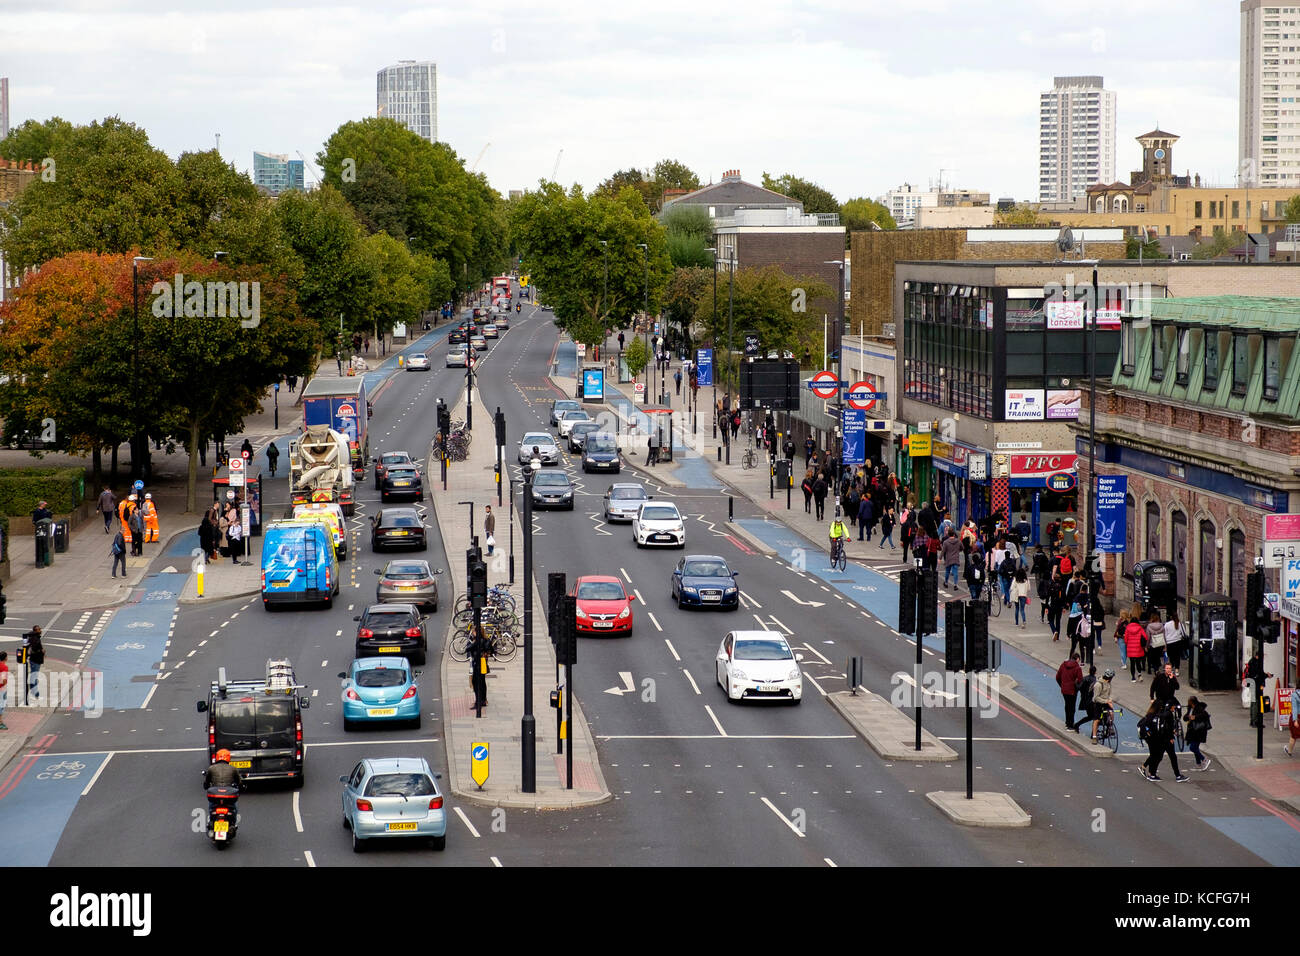 The A11 Mile End Road, at Mile End Tube Station, London as viewed from the Green Bridge Stock Photo